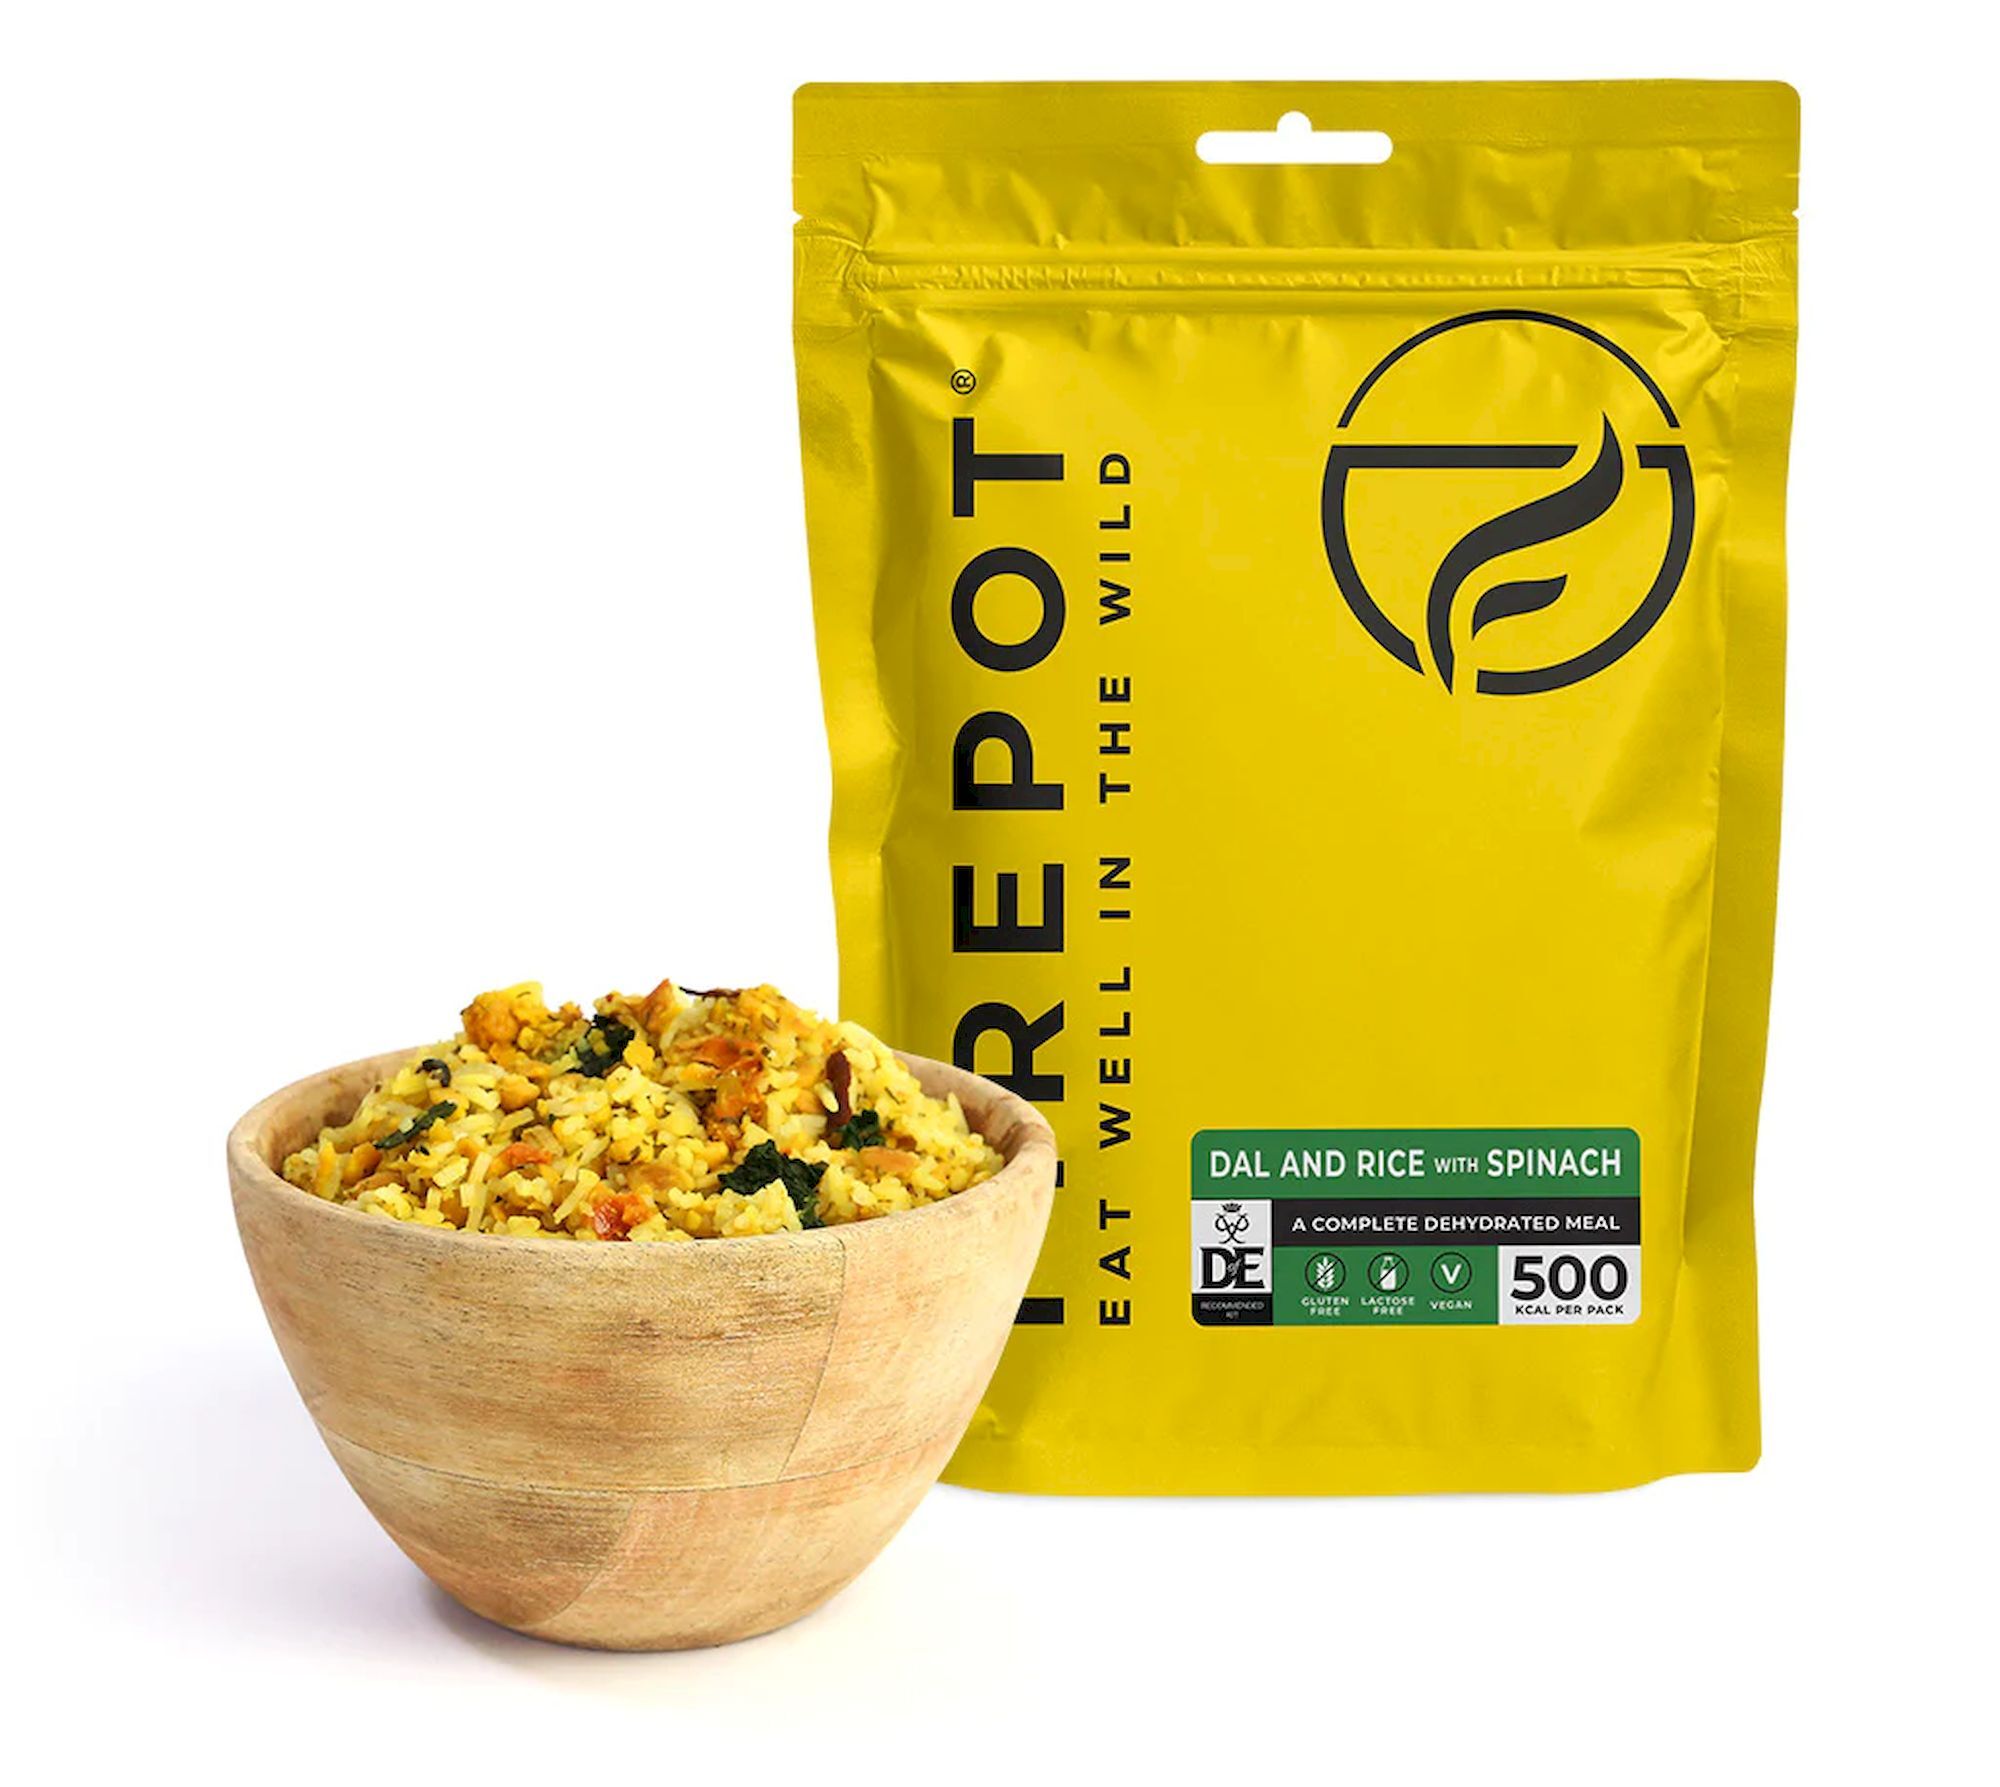 Firepot Dal and Rice with Spinach - Frysetørret mad | Hardloop